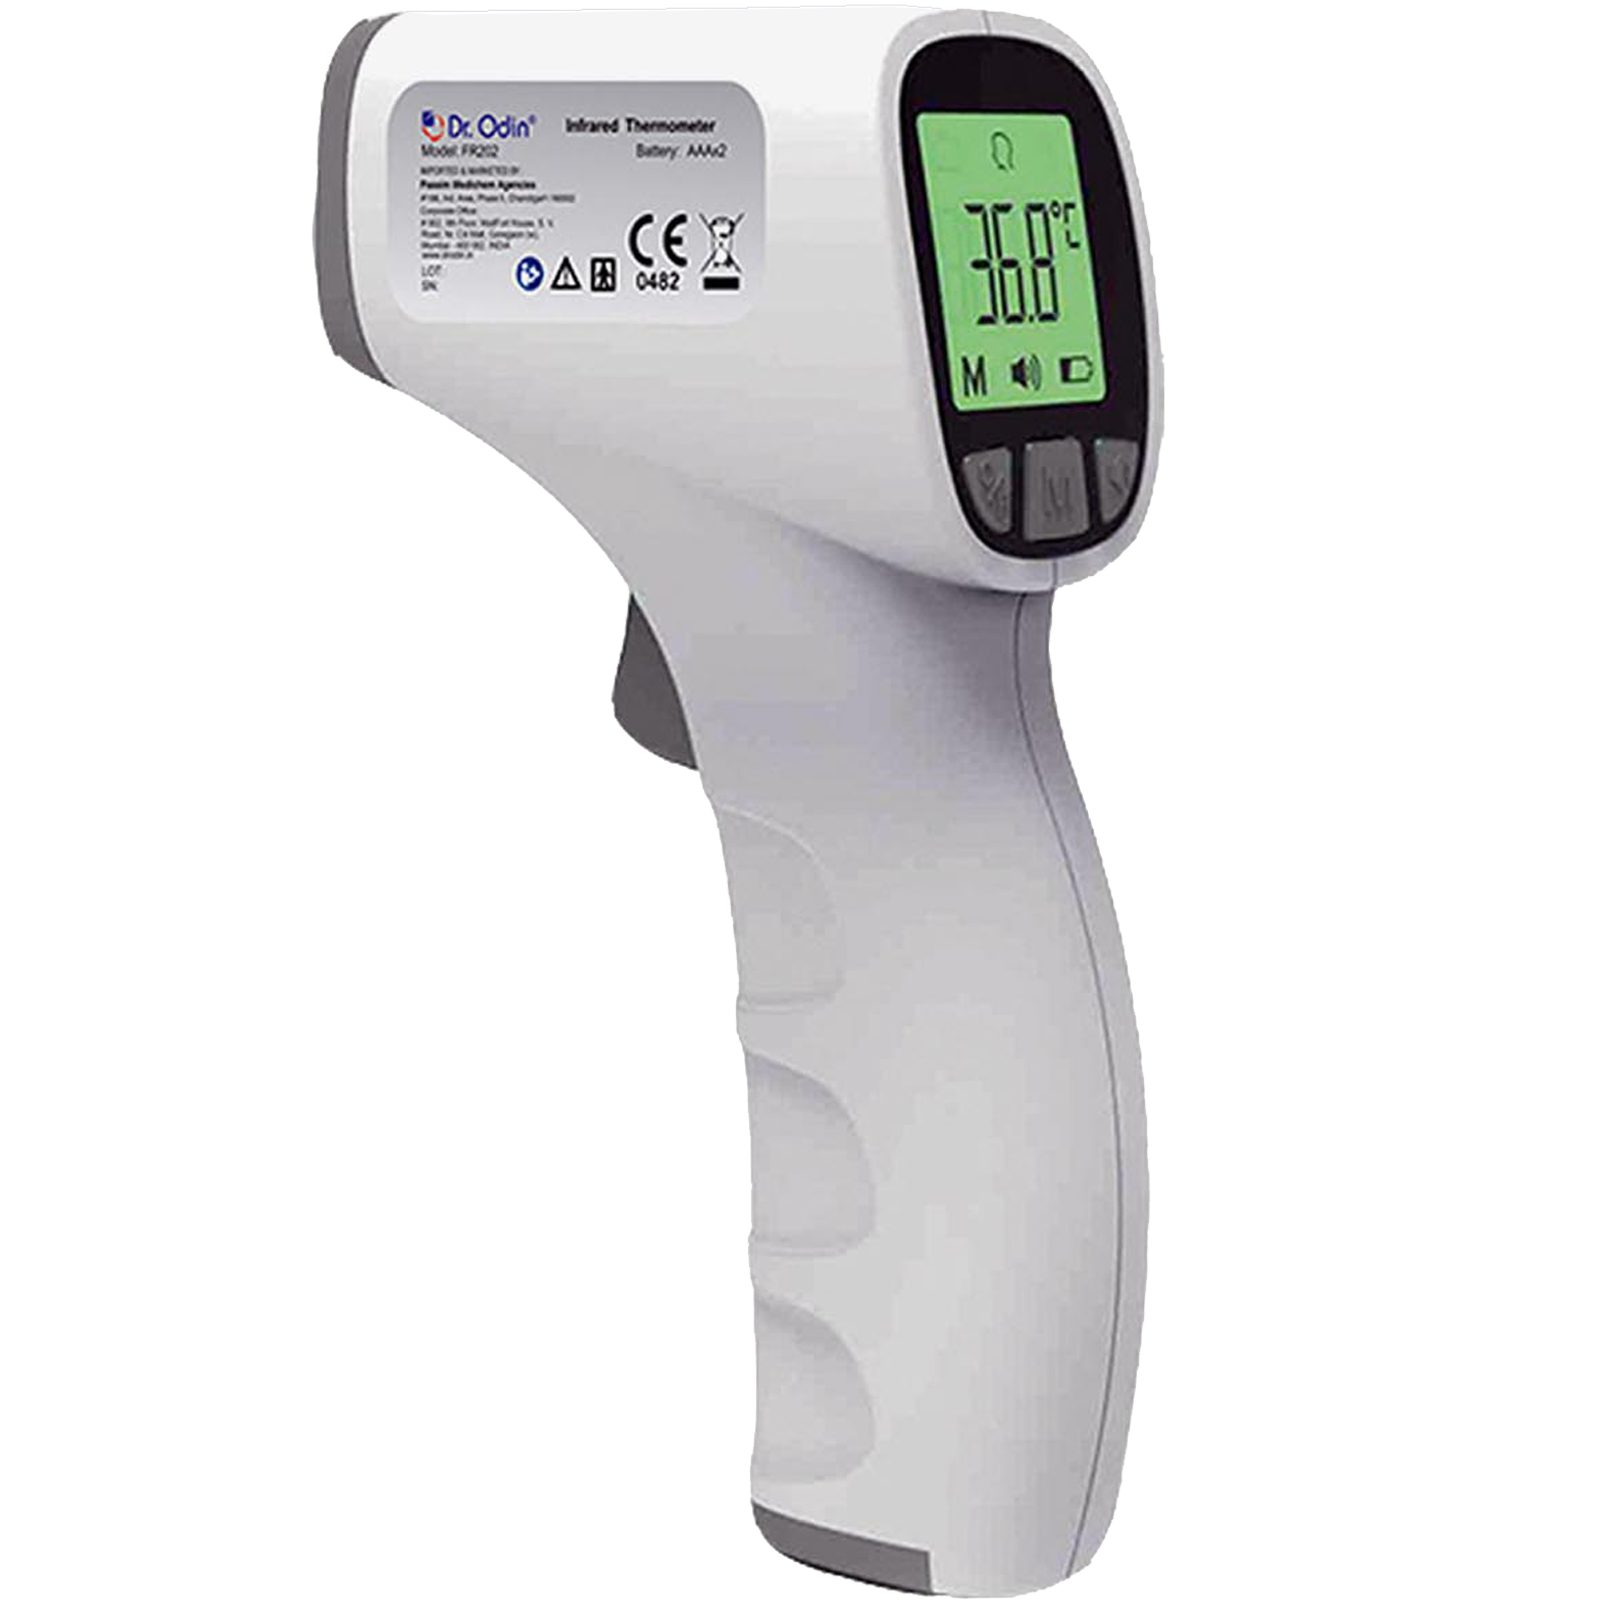 Dr. Odin - Dr. Odin LCD Infrared Thermometer (Automatic Mode Switch, JPD-FR202, White)